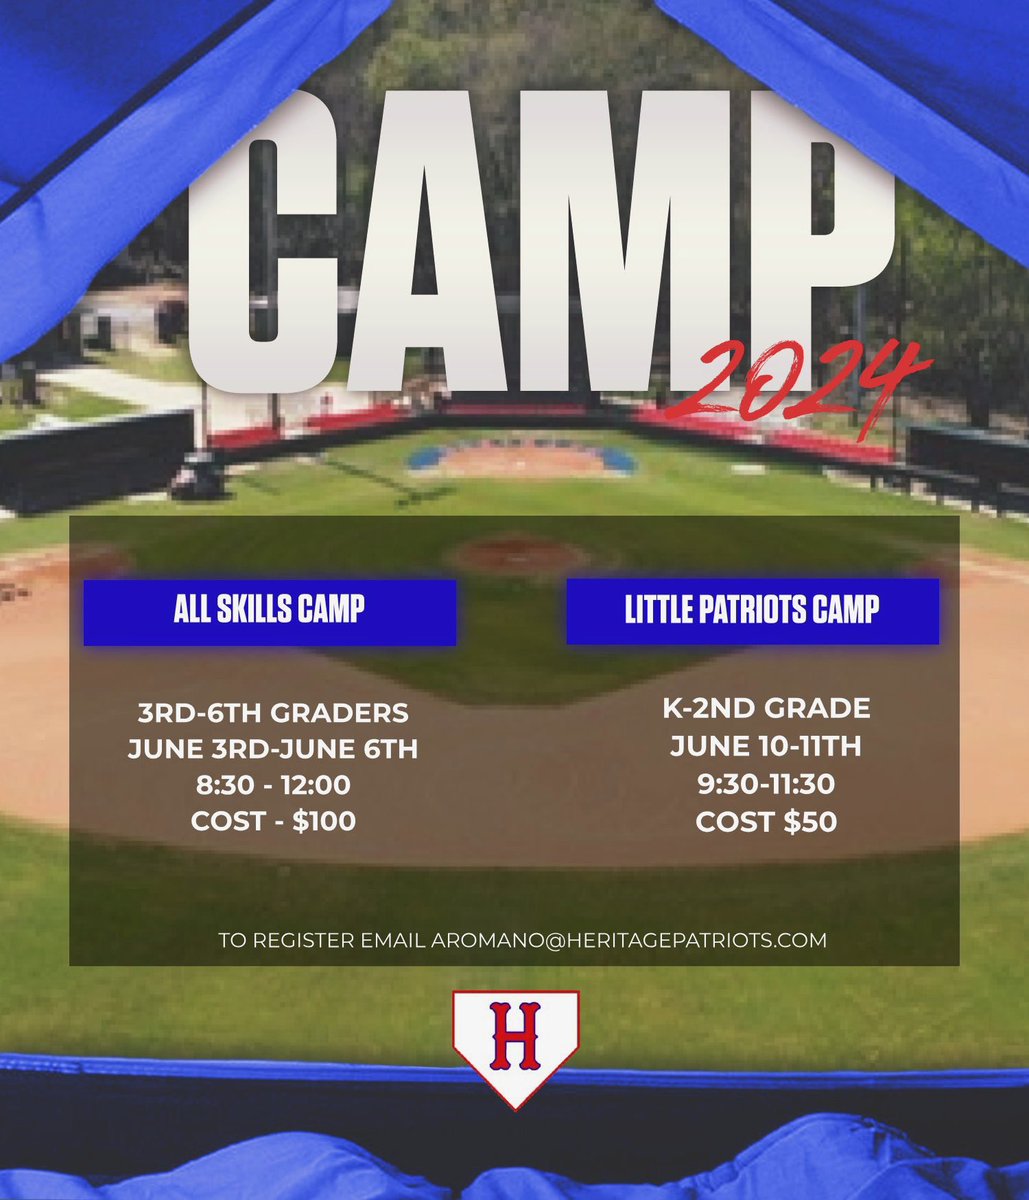 Don’t forget about our upcoming camps!! We want to see a lot of future Pats here!